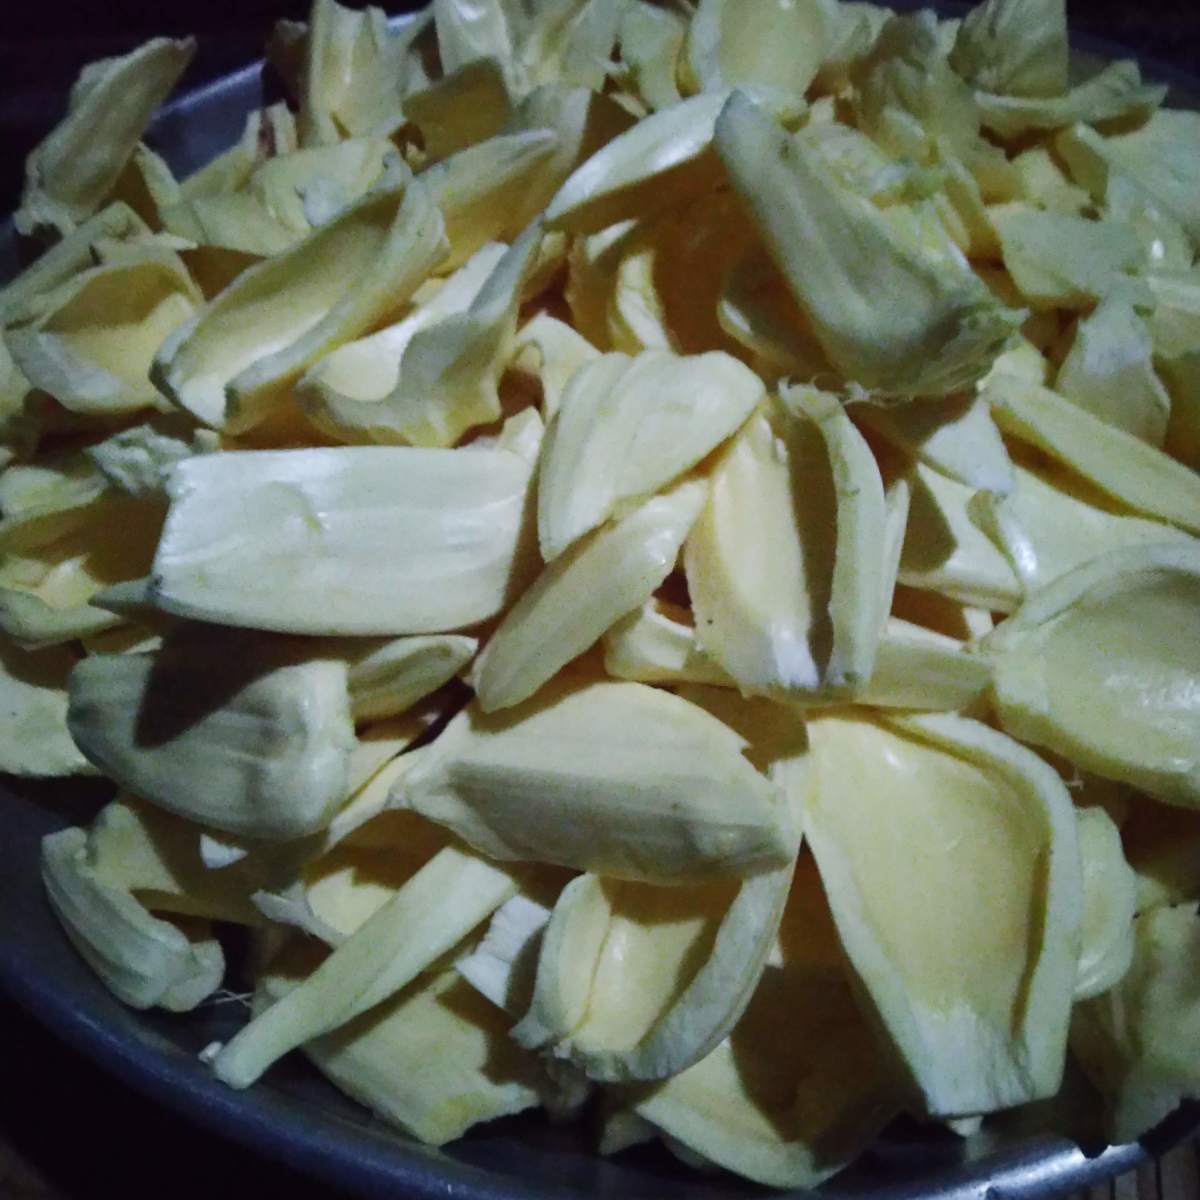 Jackfruit perianth lobes cut, seperated cleaned and split by removing seeds